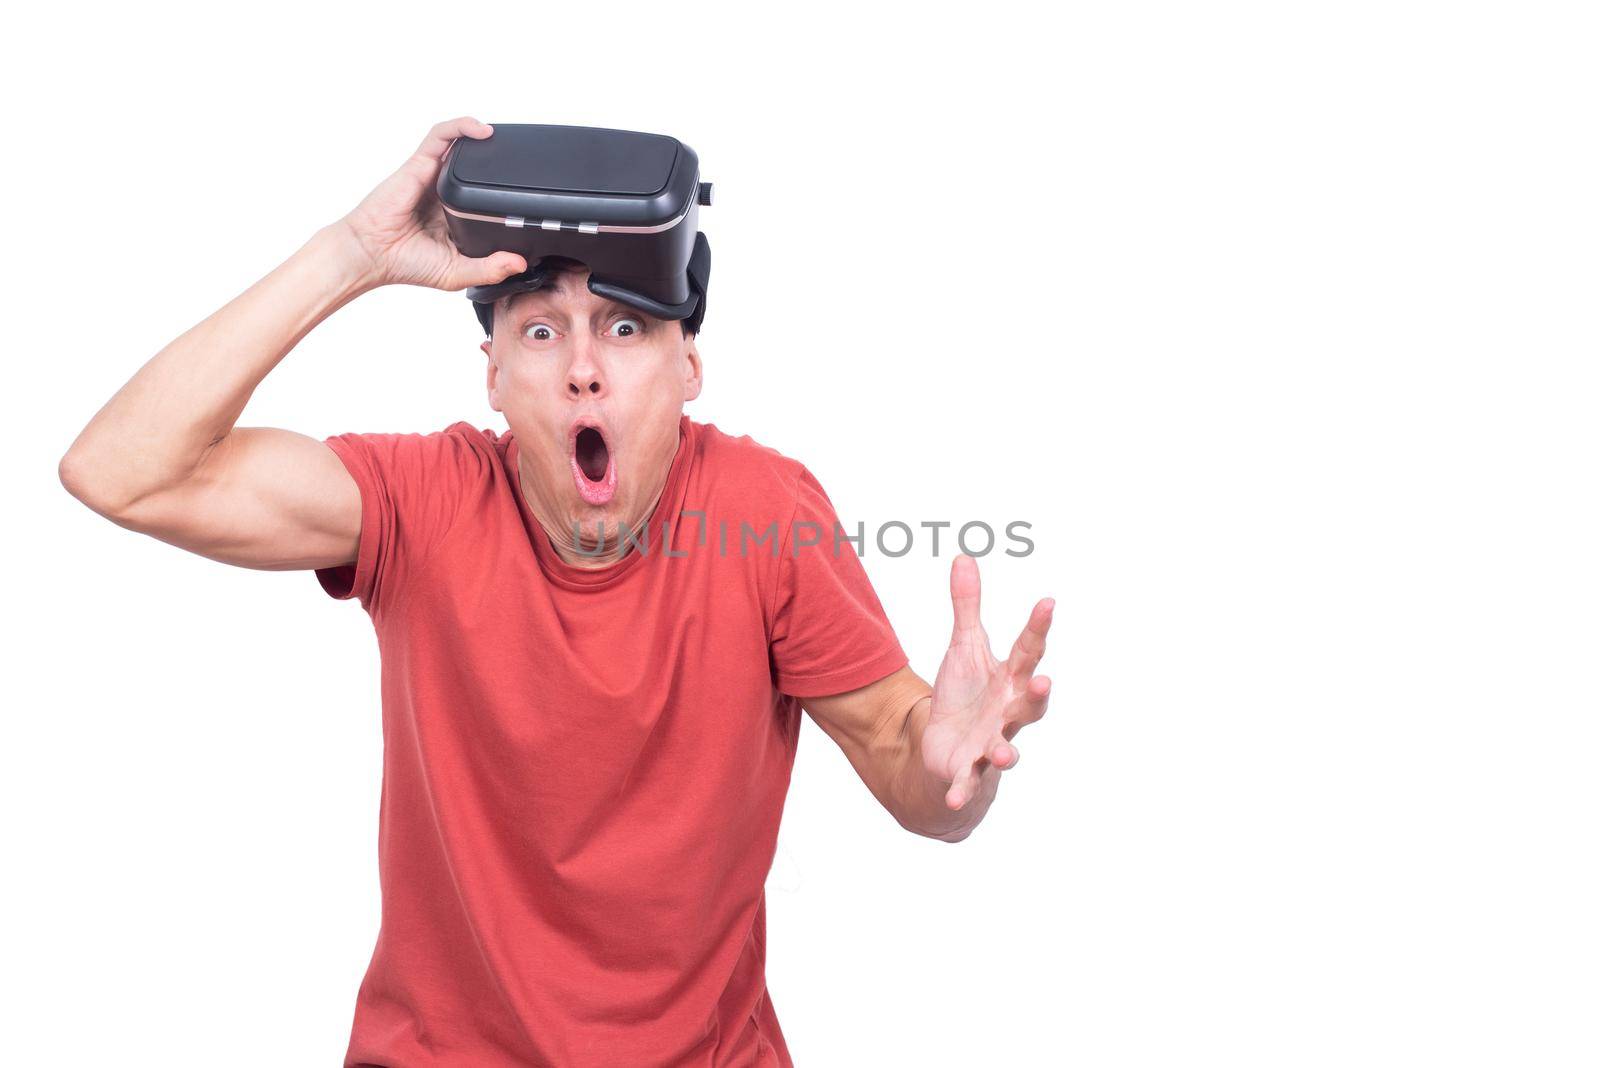 Surprised male gamer with VR headset looking at camera with opened mouth while standing isolated on white background in light studio